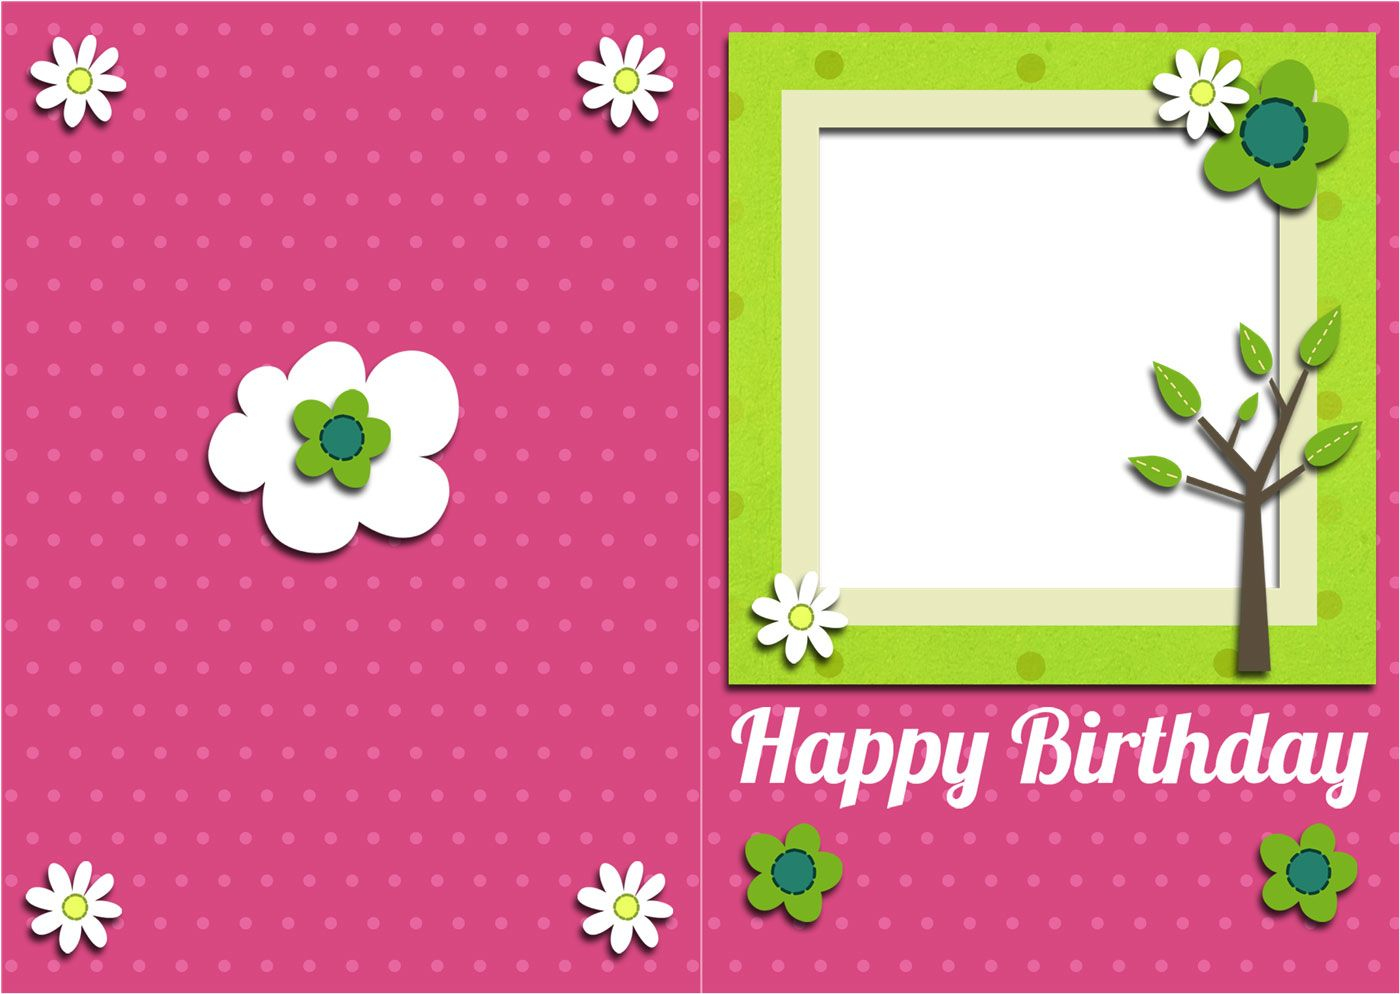 Make Your Own Birthday Card Ideas 010 Template Ideas Free Birthday Card Templates Fantastic Publisher